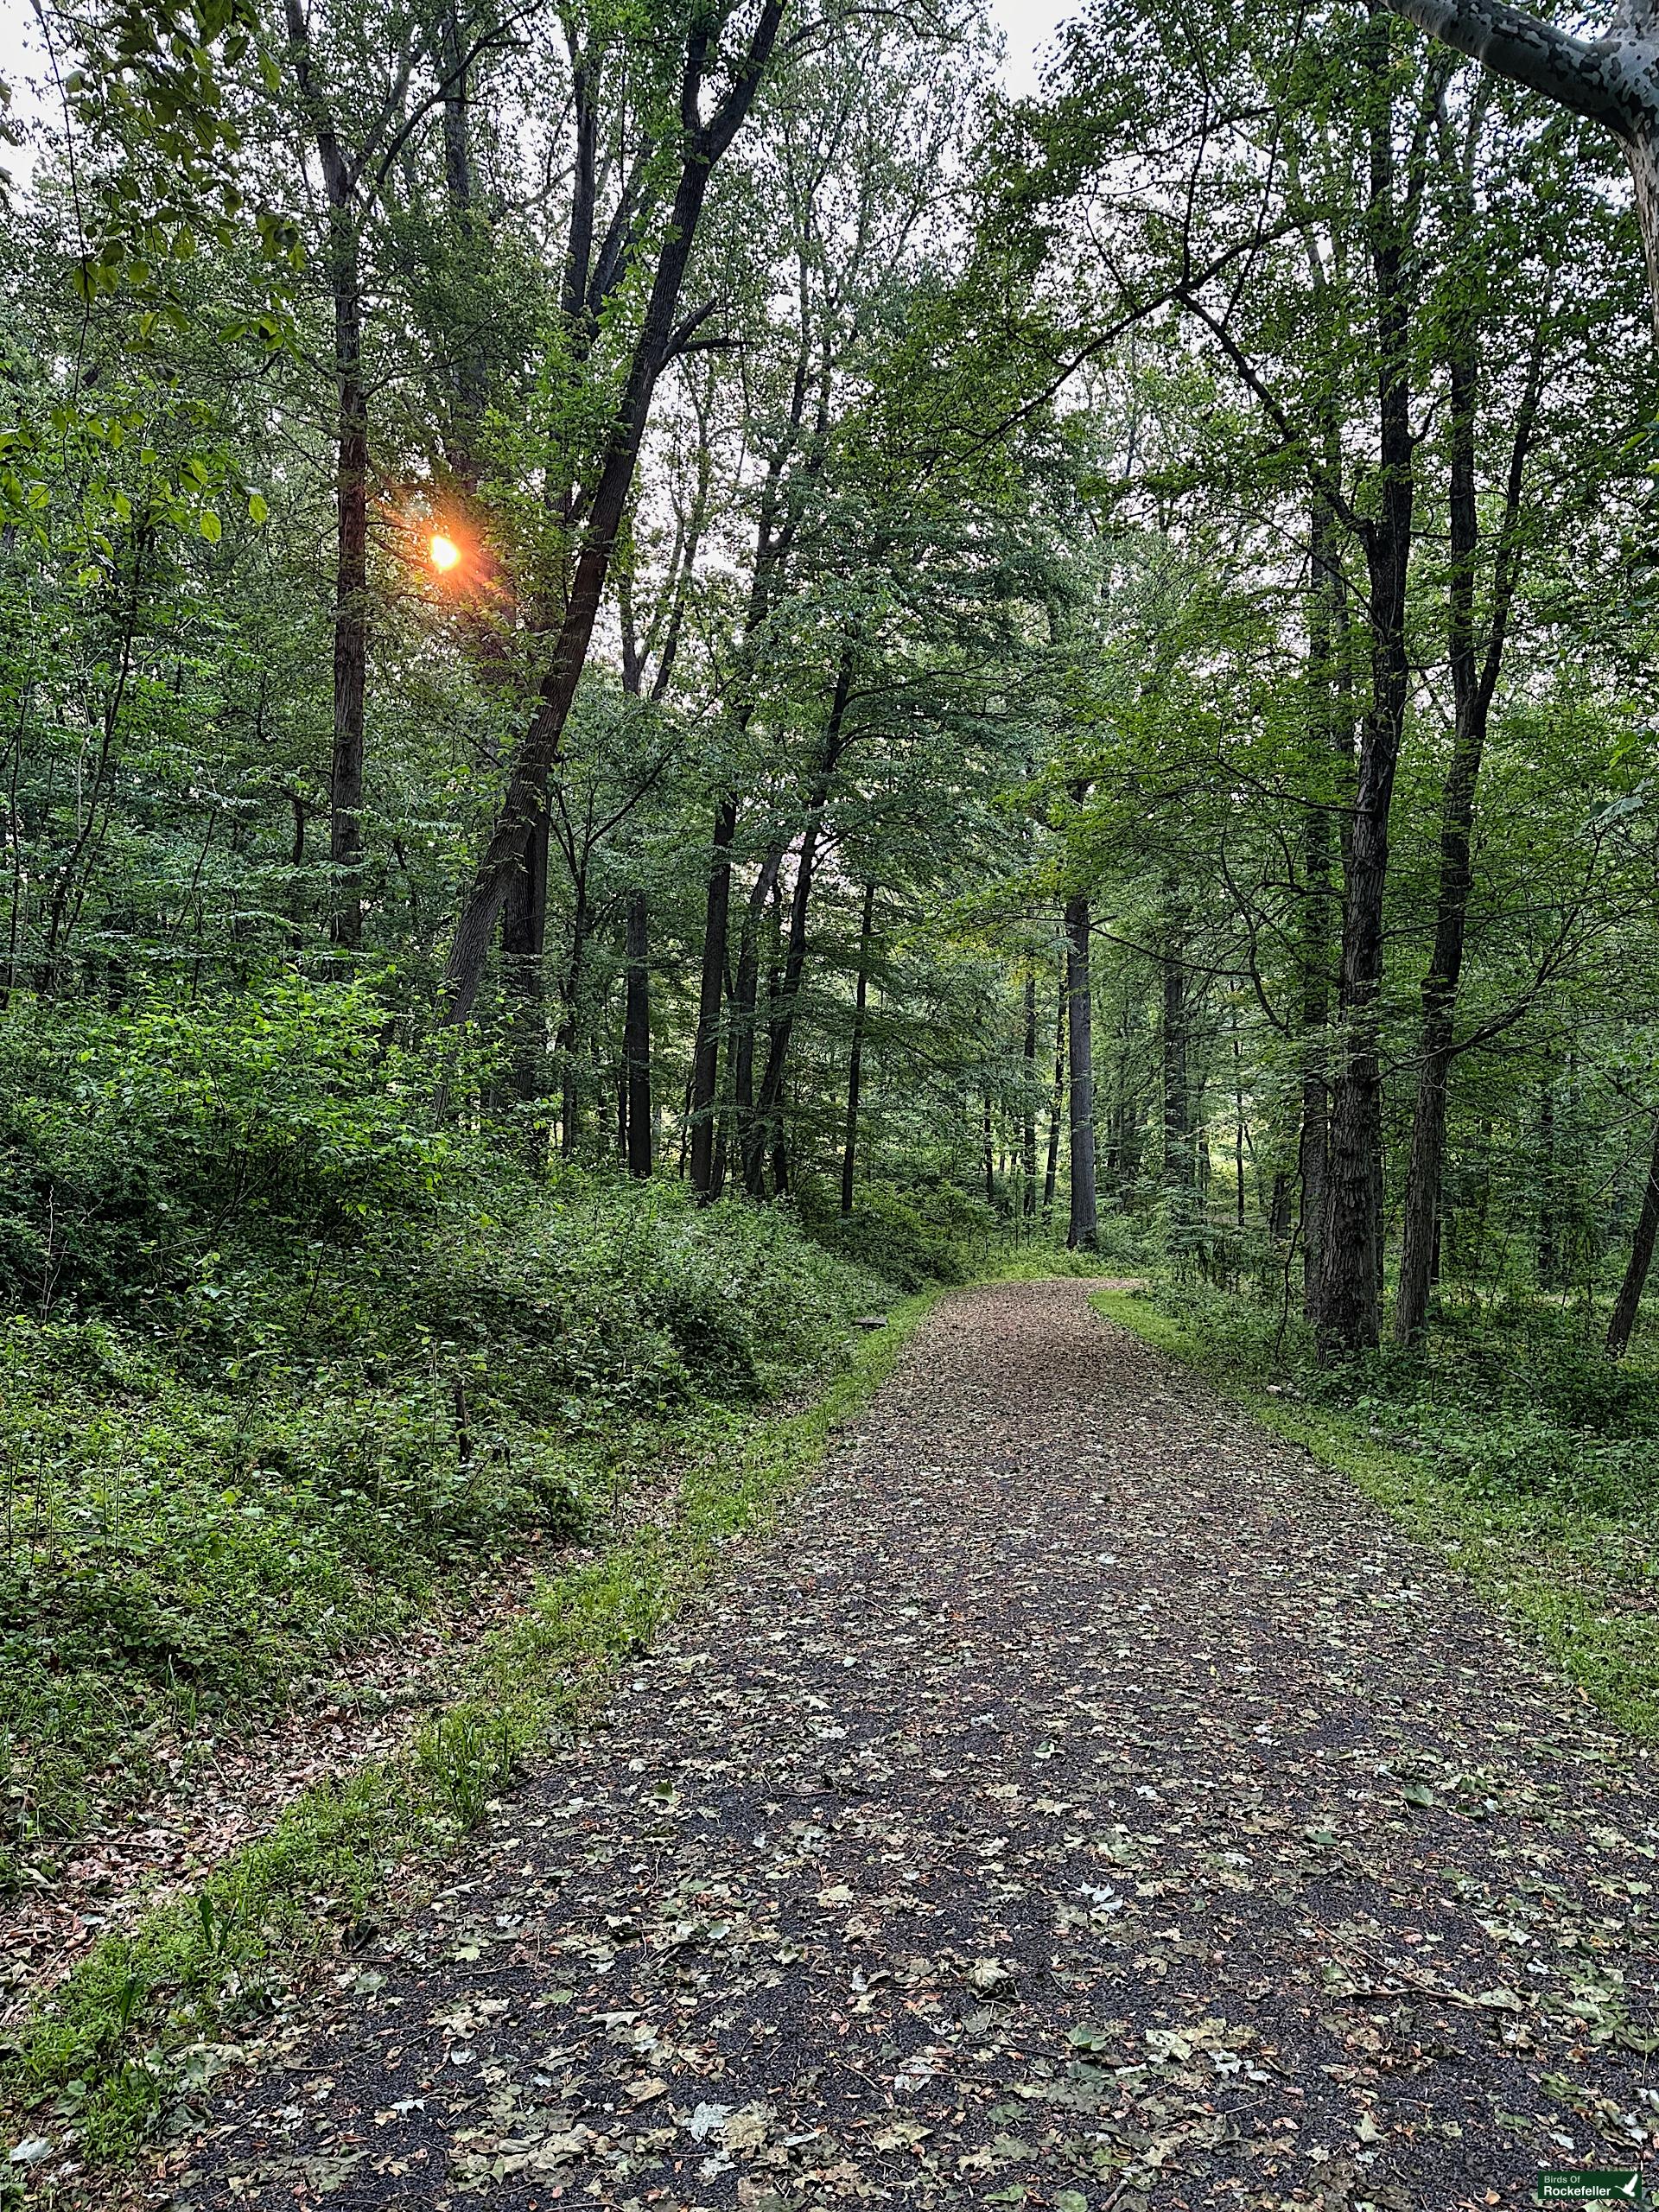 A path through a wooded area with trees in the background.